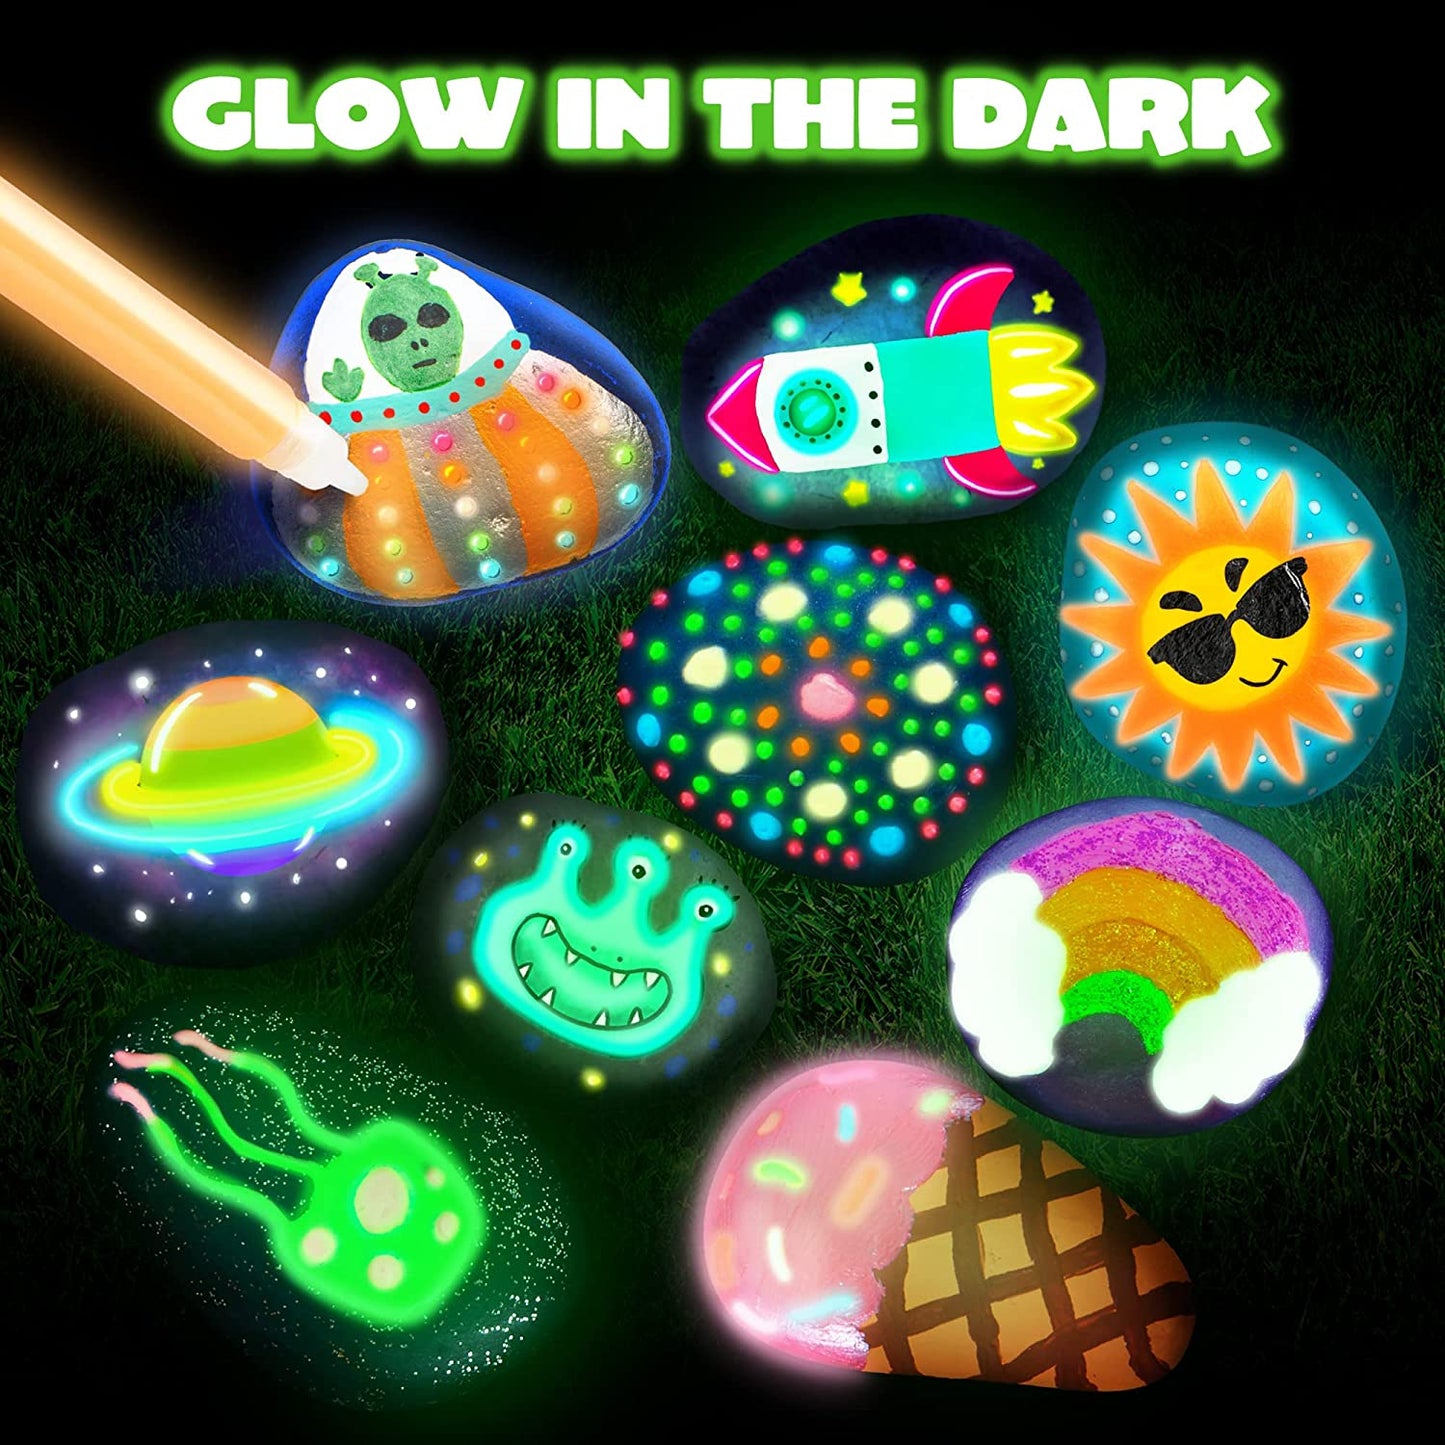 Nine glowing rocks which have been painted using a glow in the dark rock painting kit for kids.